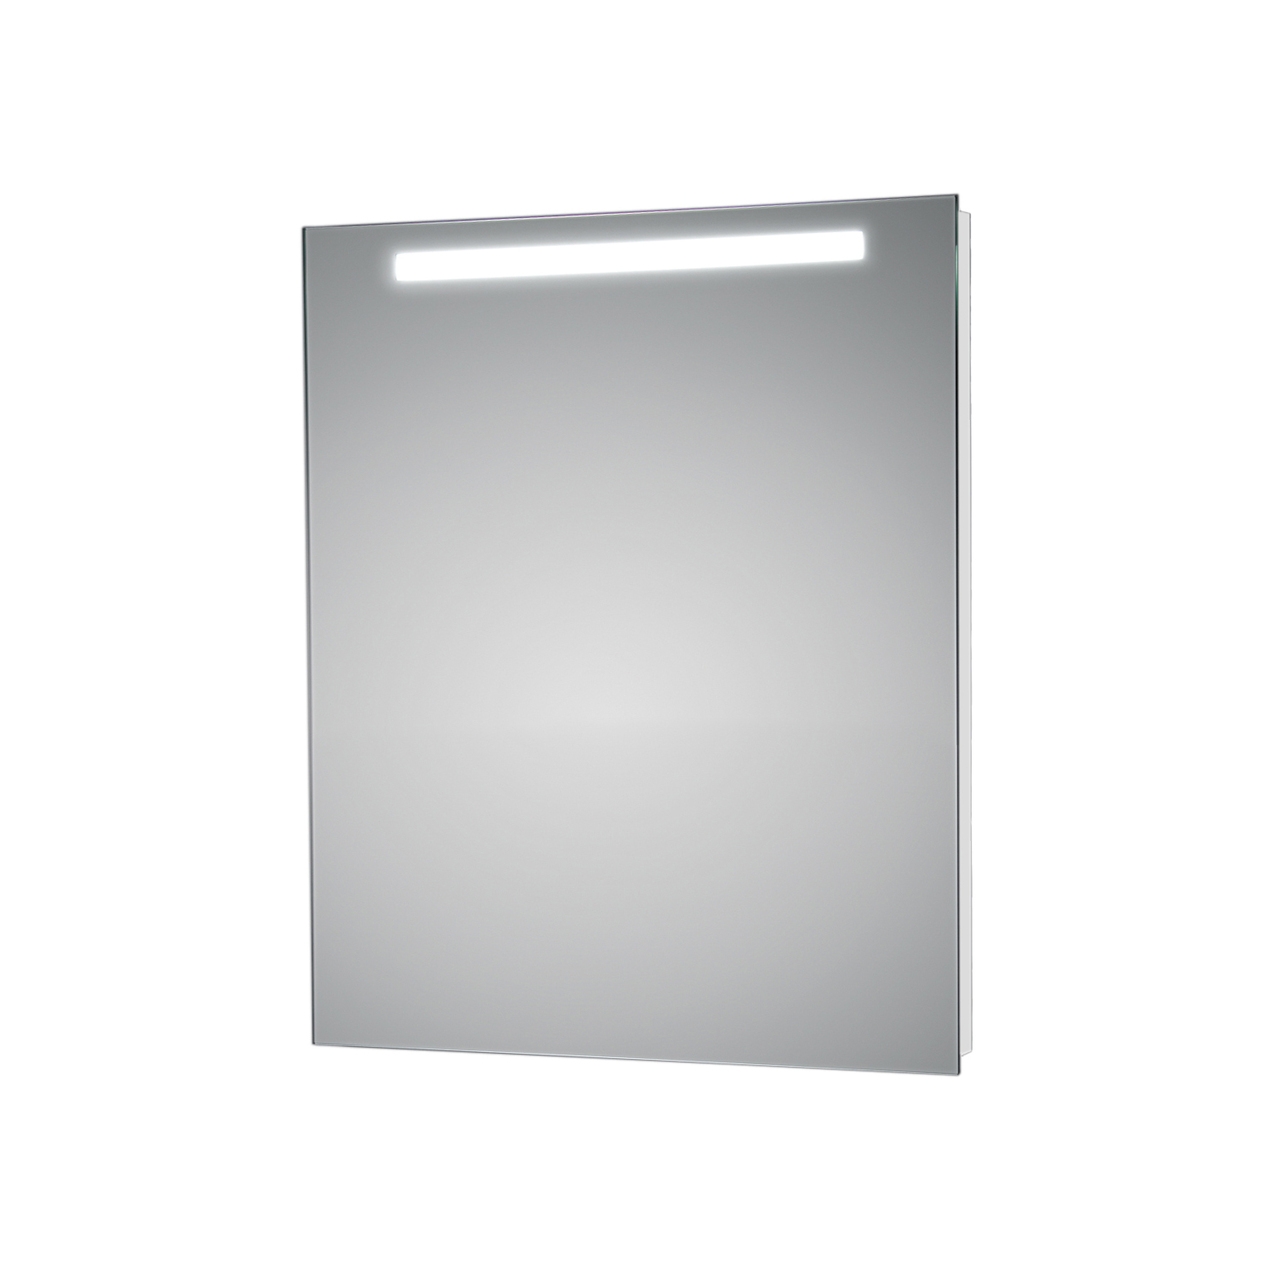 T5-1 mirror with LED light 47.2 x 23.6